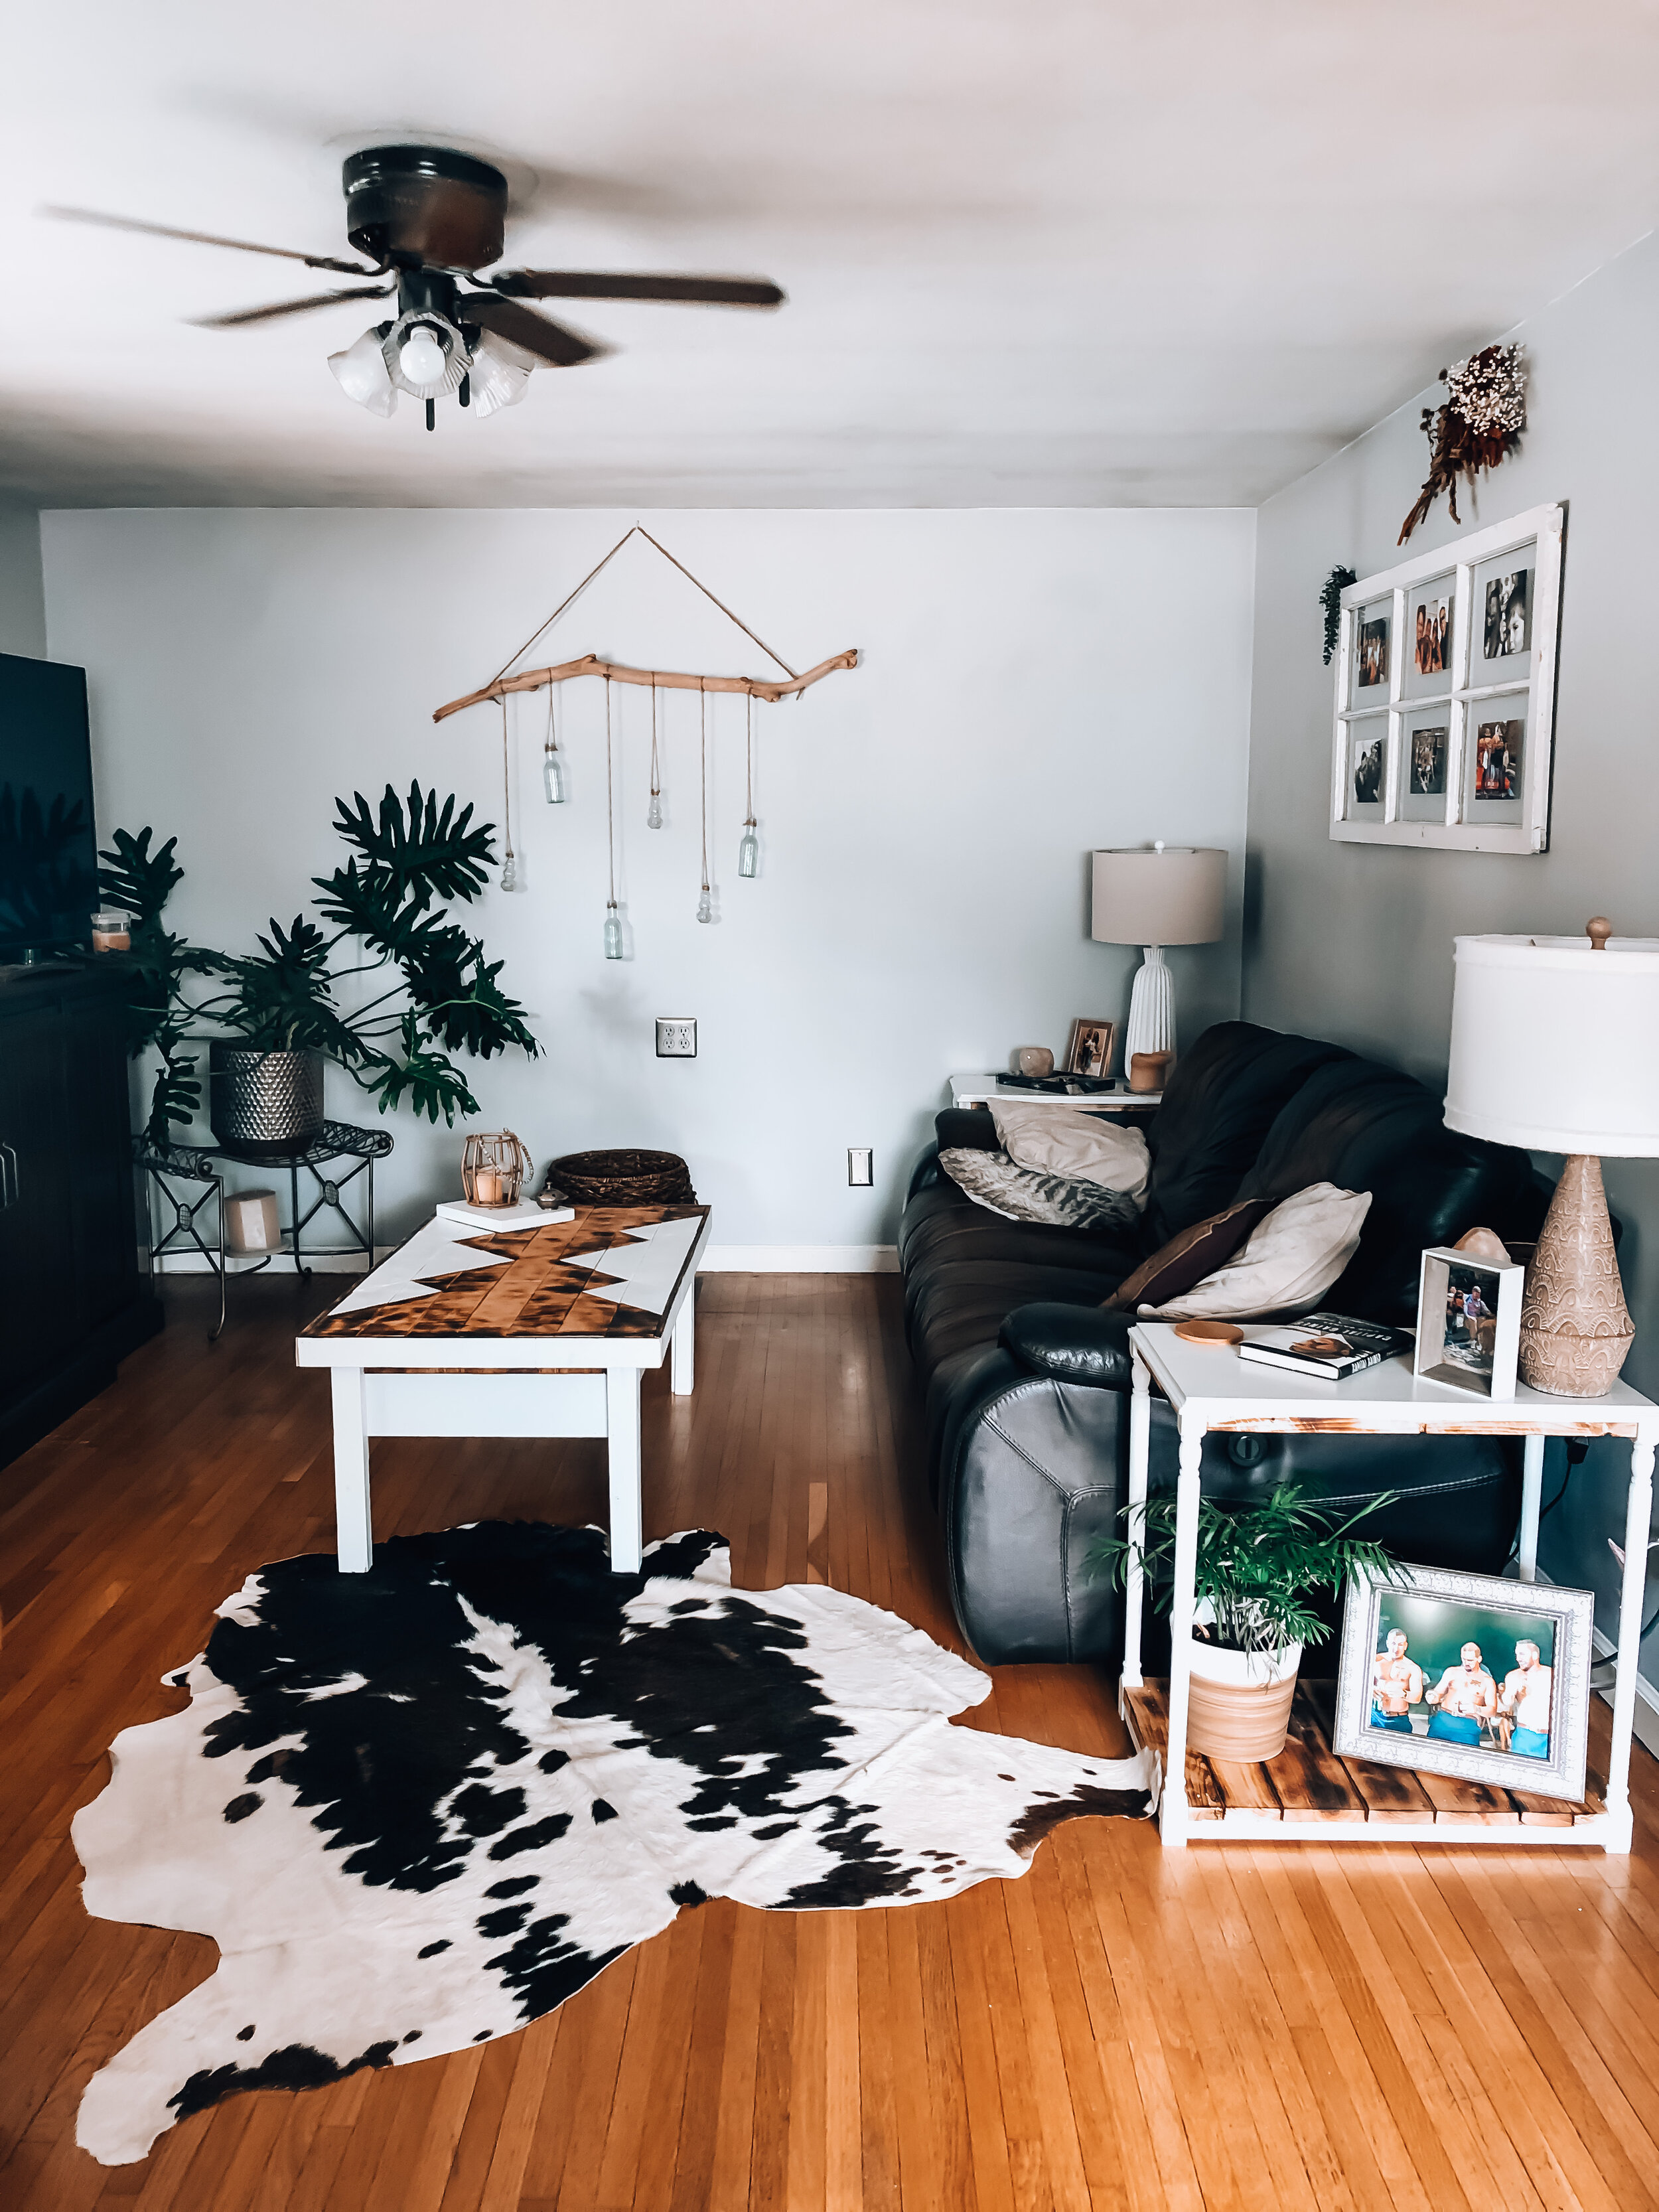 Boho Chic Home Design Tips from Industry Professionals Indie Twenty Jewelry: Crafted & Curated Boho Jewelry & Outfits